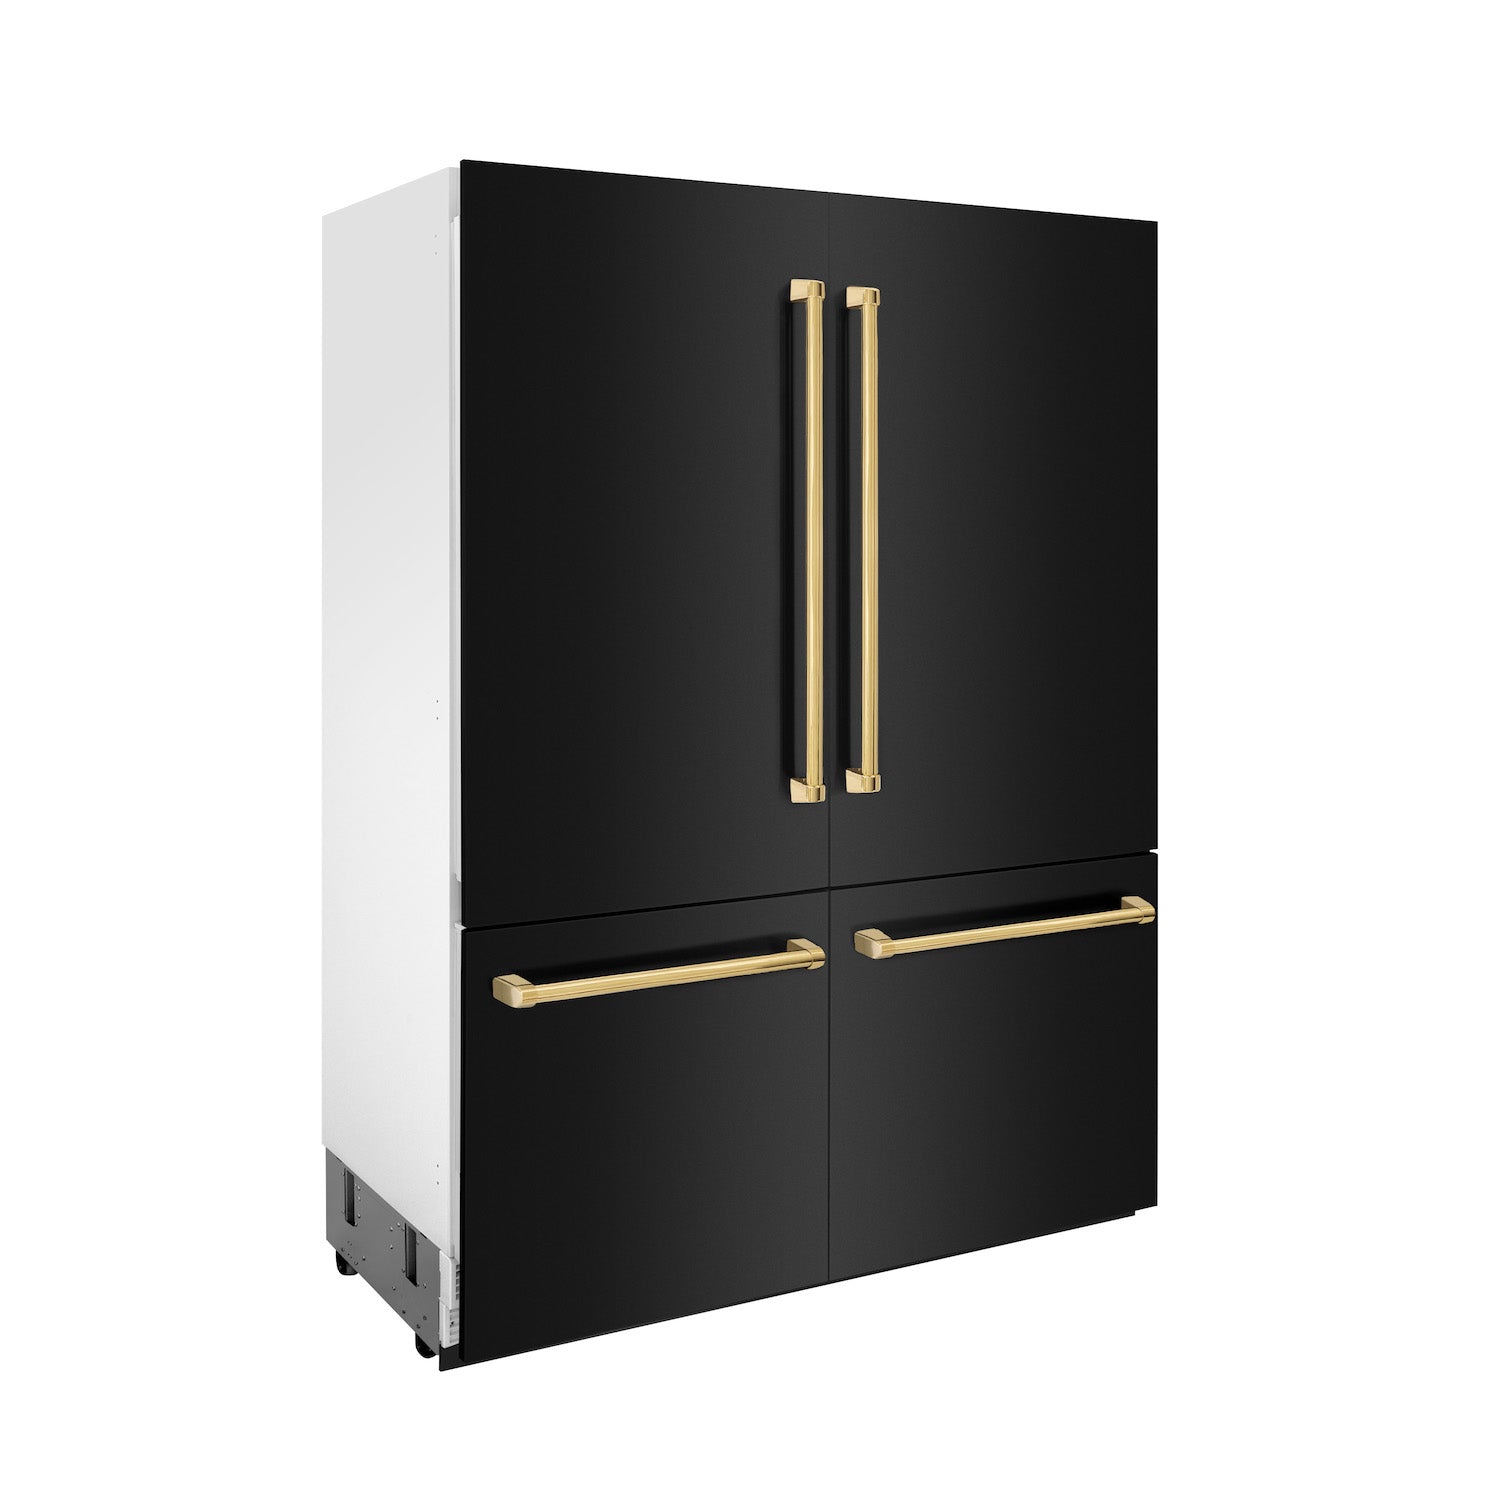 ZLINE 60" Autograph Edition Built-in French Door Refrigerator in Black Stainless Steel with Polished Gold Accents side.